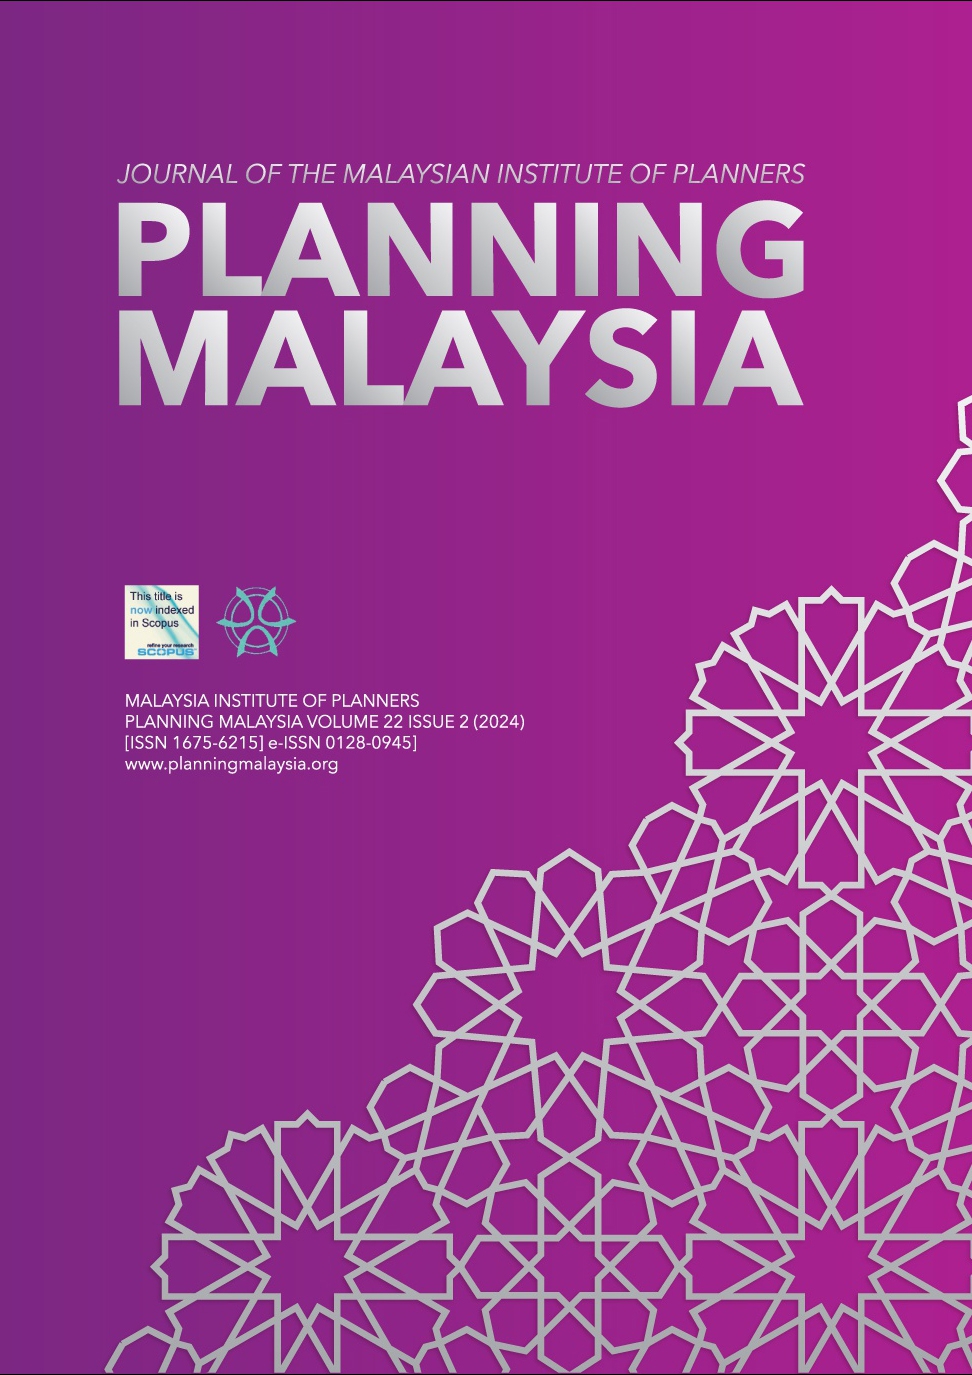 					View Vol. 22 (2024): PLANNING MALAYSIA JOURNAL : Volume 22, Issue 2, 2024
				